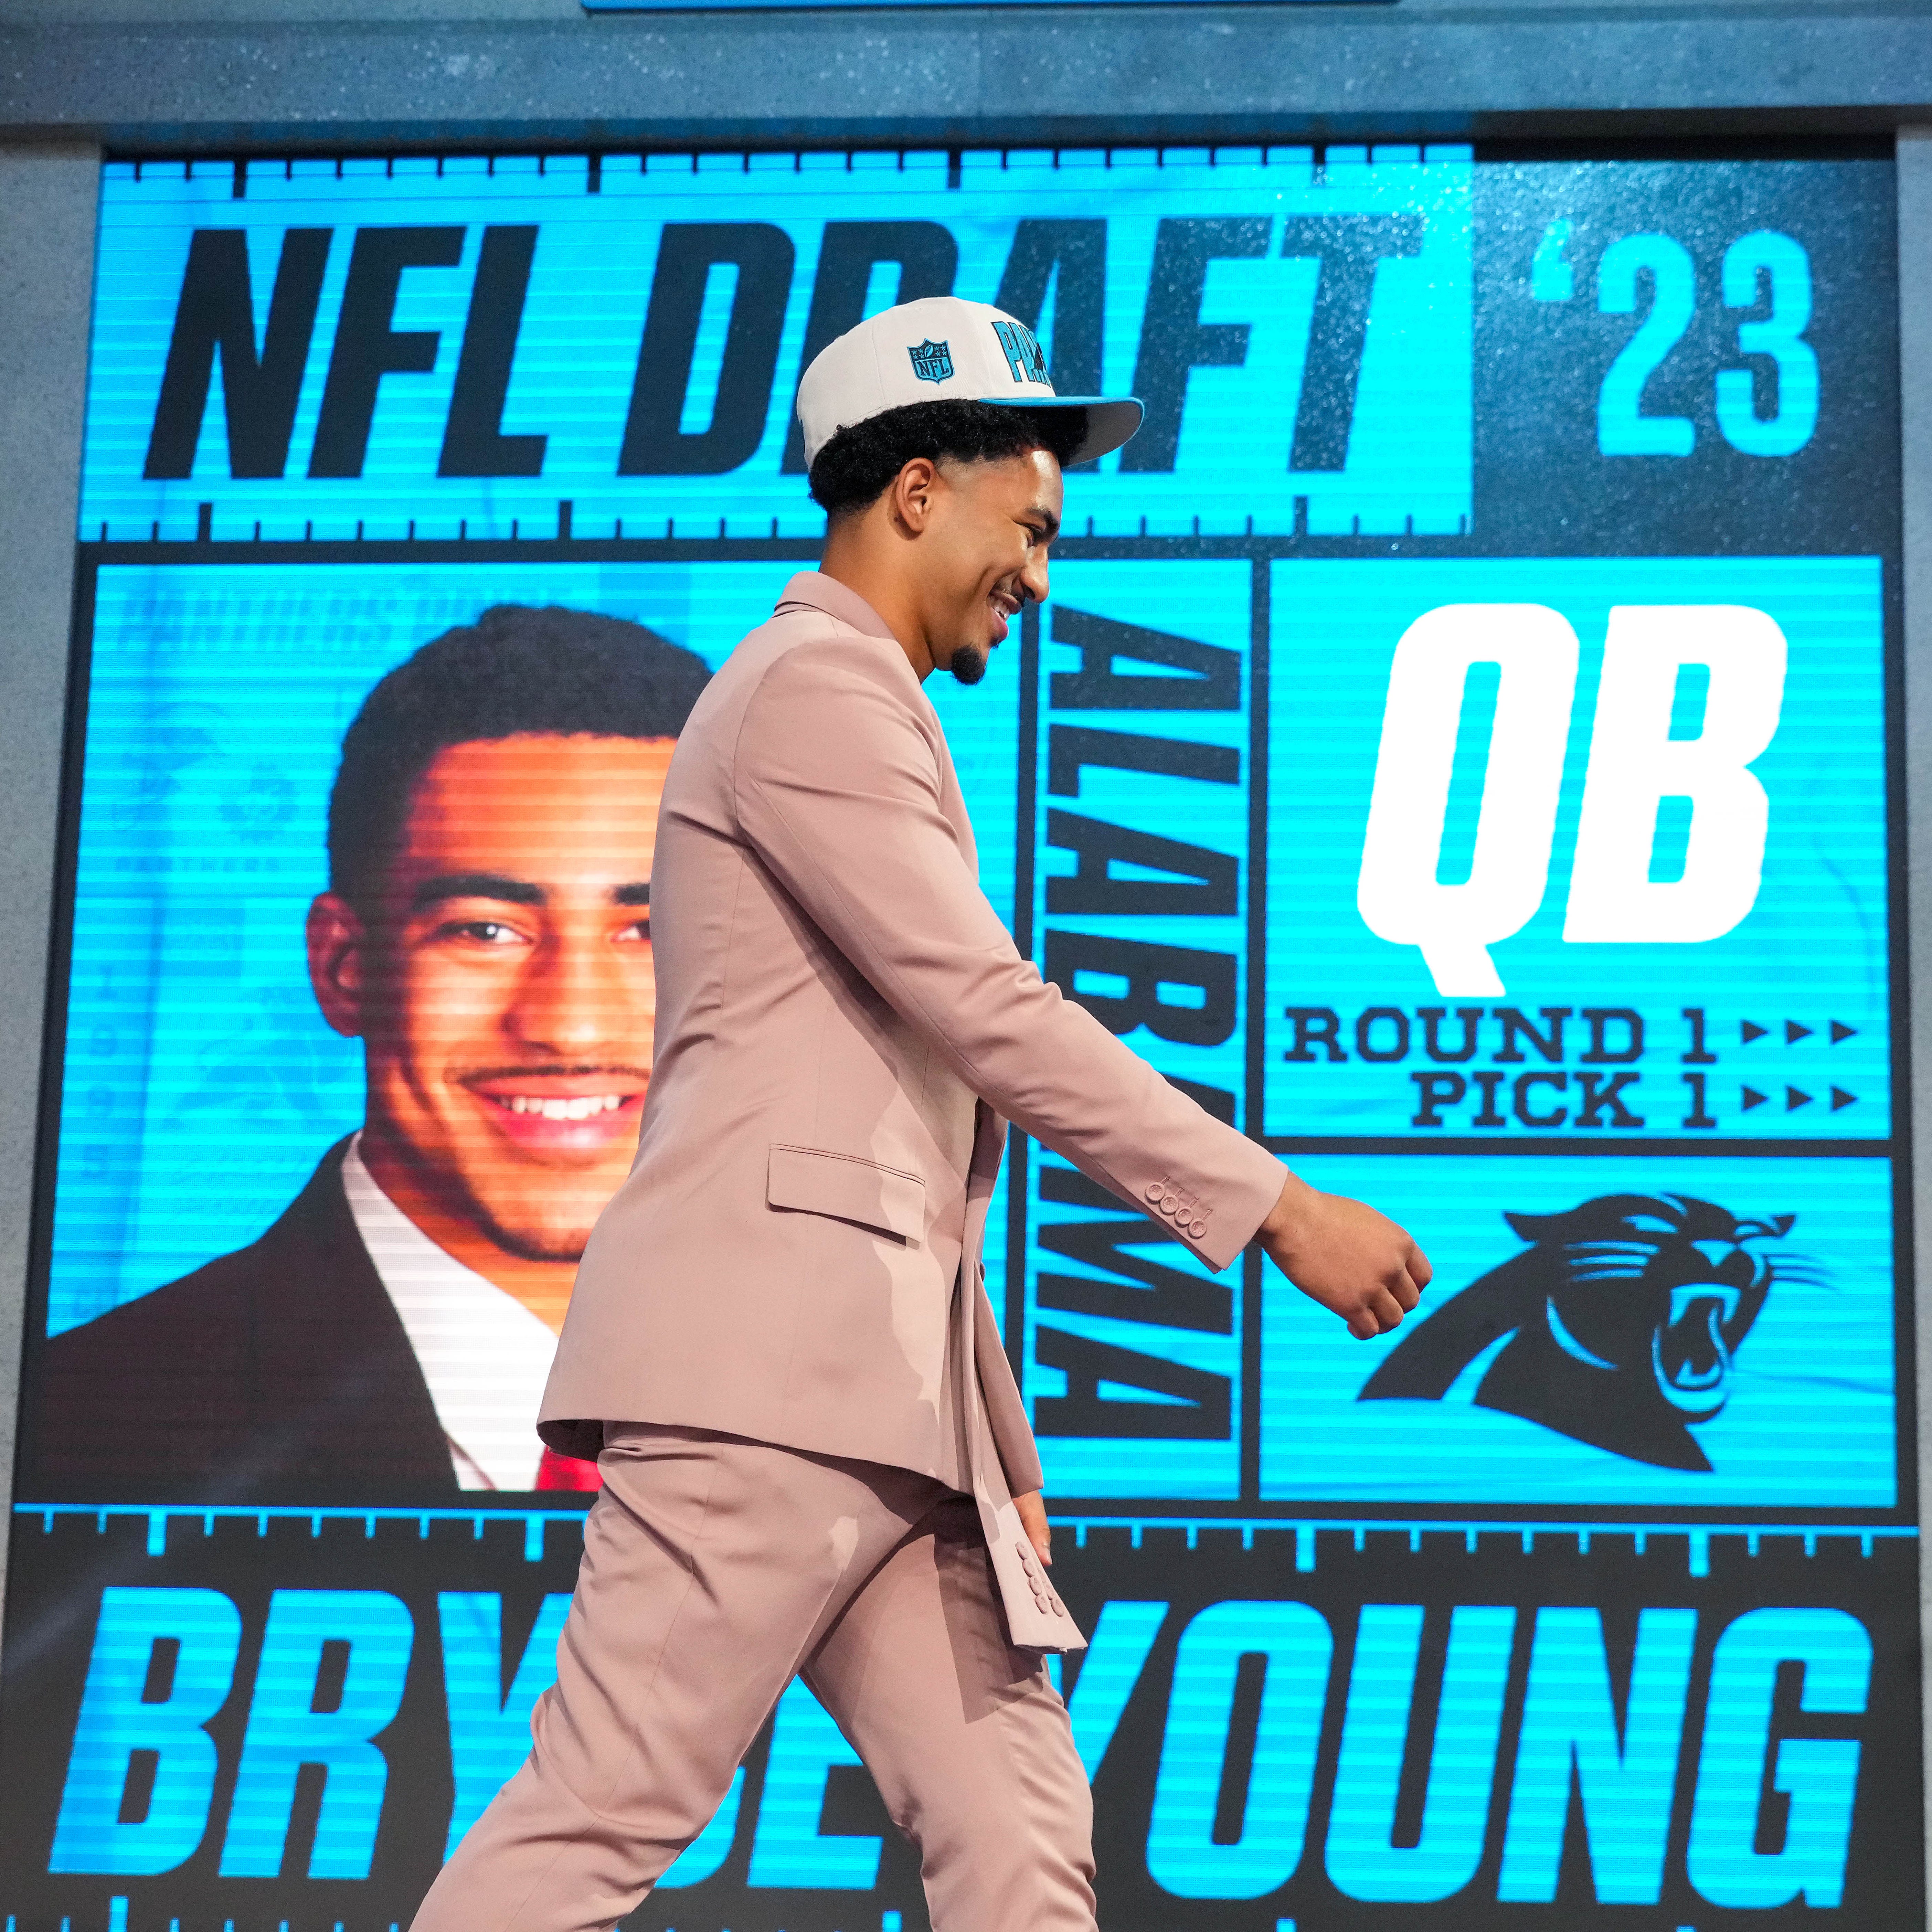 Bryce Young walks on stage after being drafted first overall by the Panthers during the 2023 NFL draft at Union Station in Kansas City, Missouri on April 27, 2023.